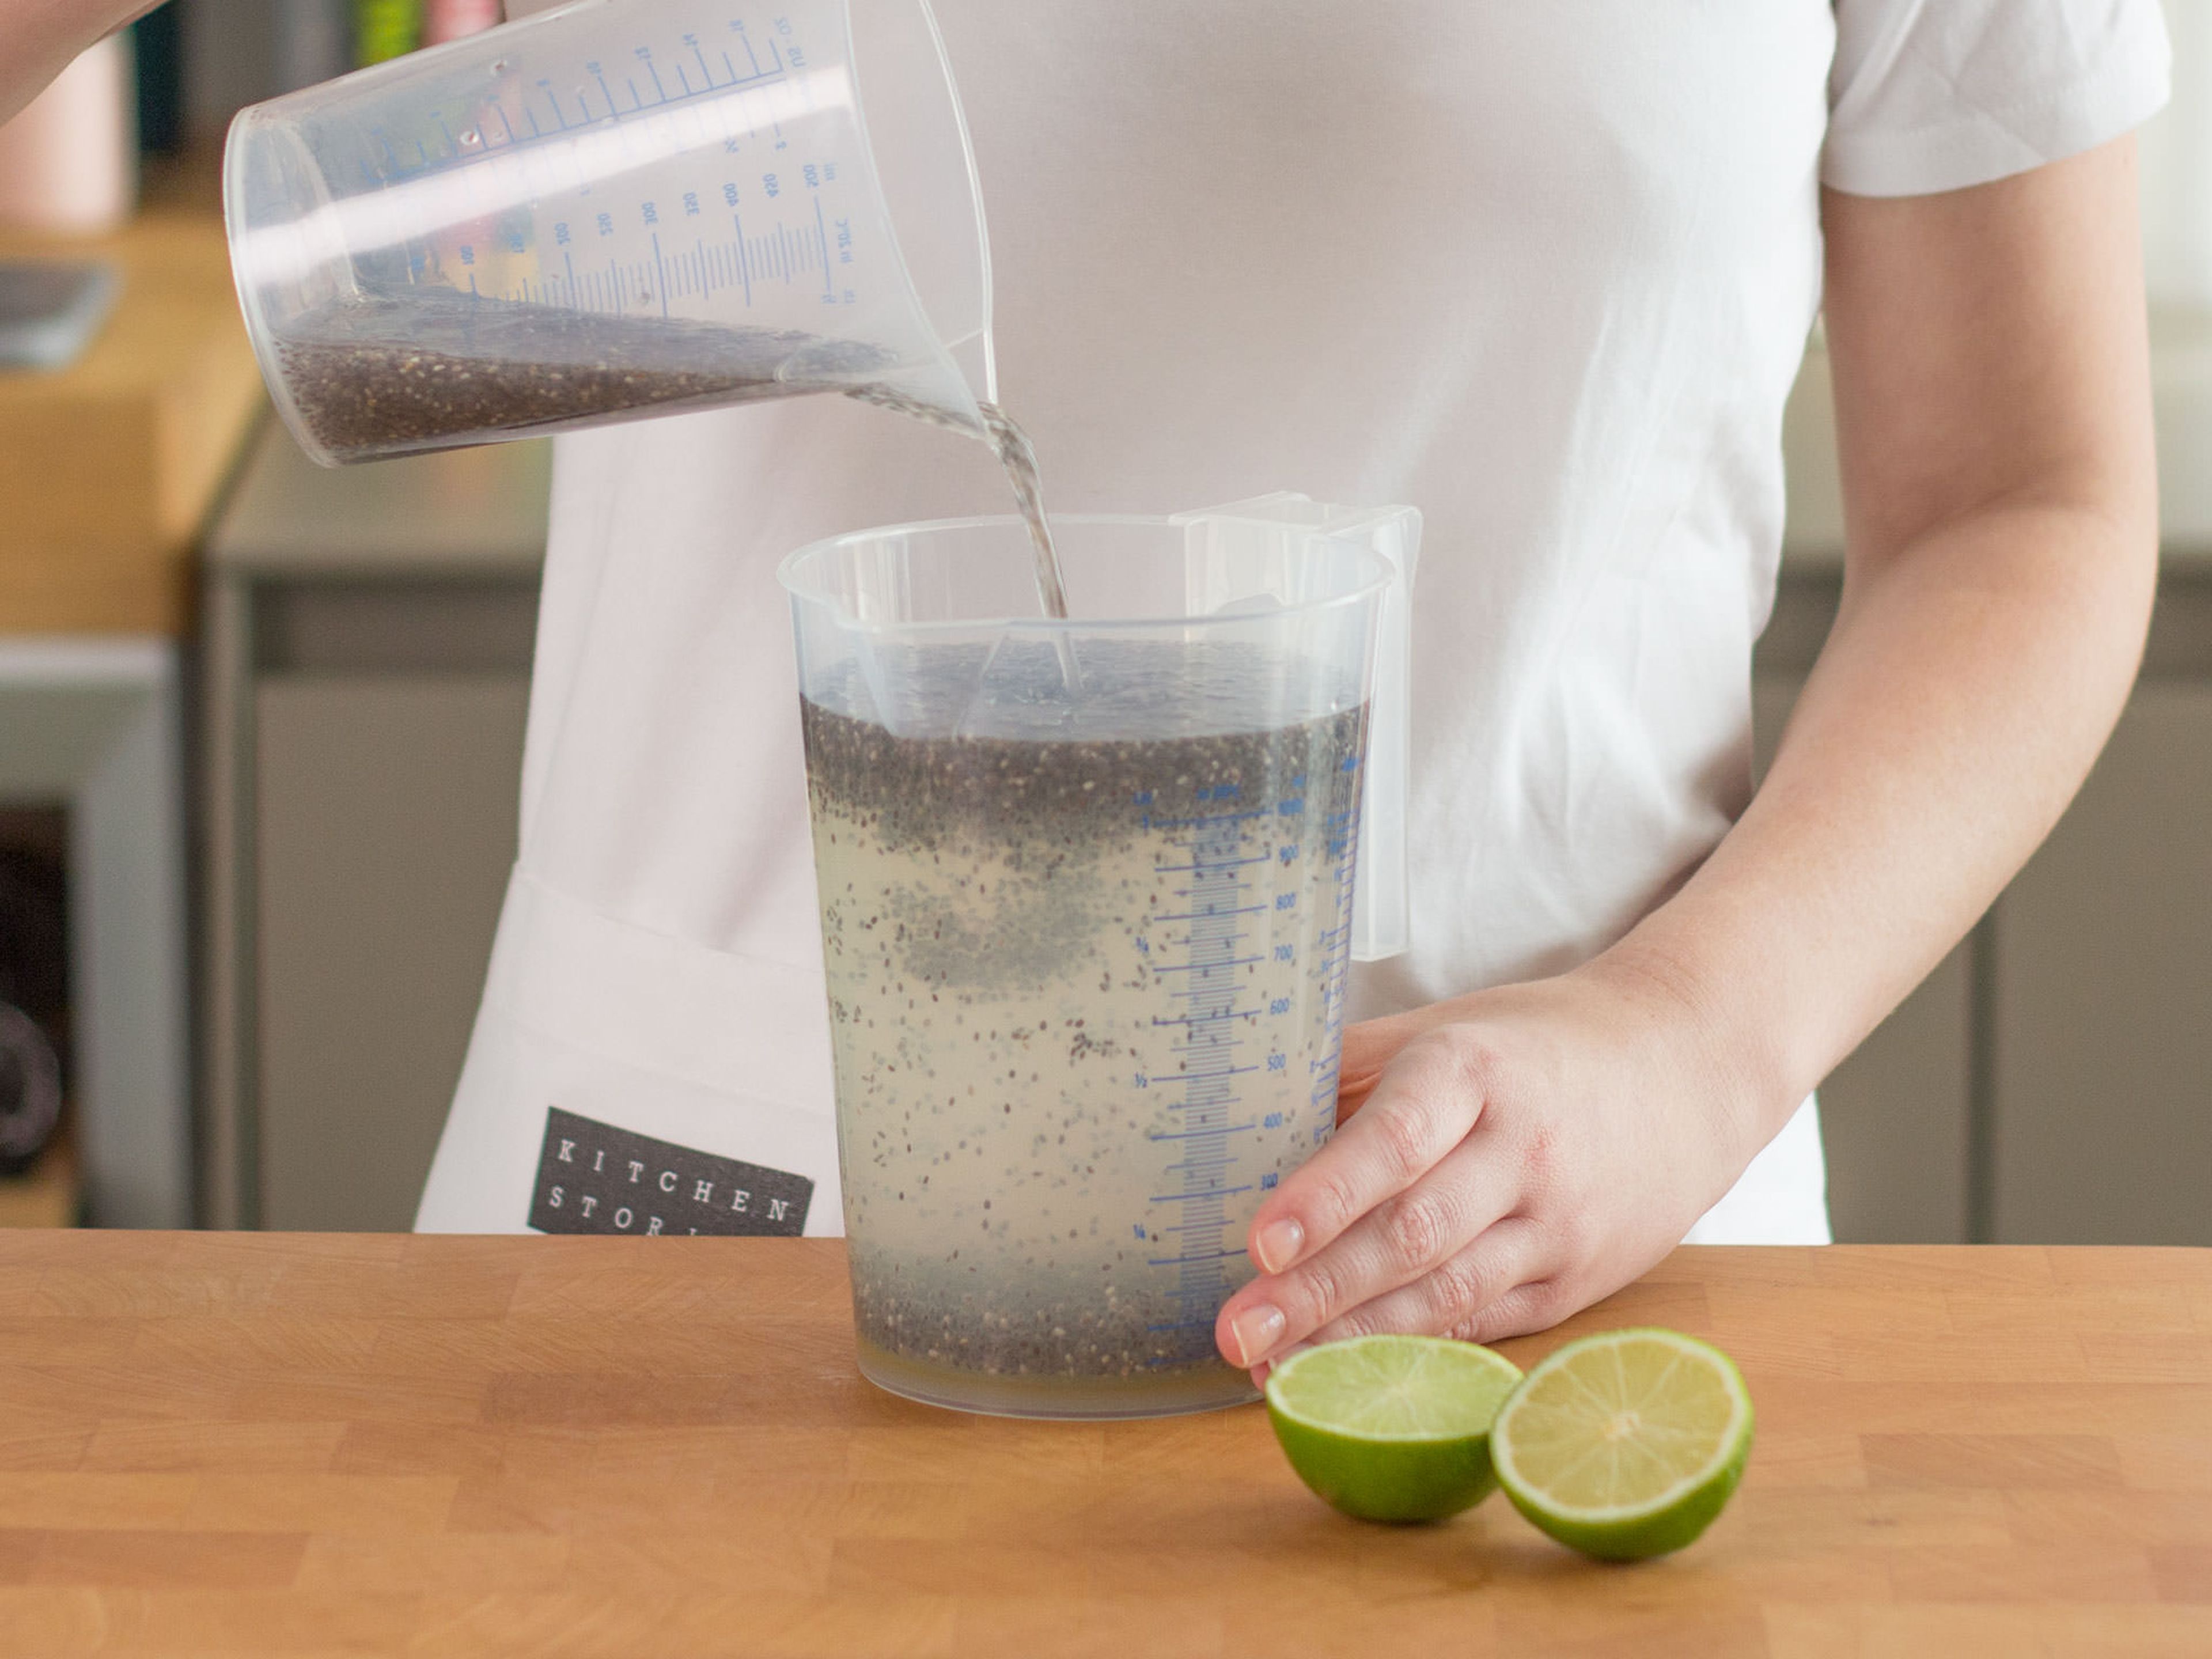 Add lime juice and agave nectar to chia seed water. Stir thoroughly and then add to rest of the water.